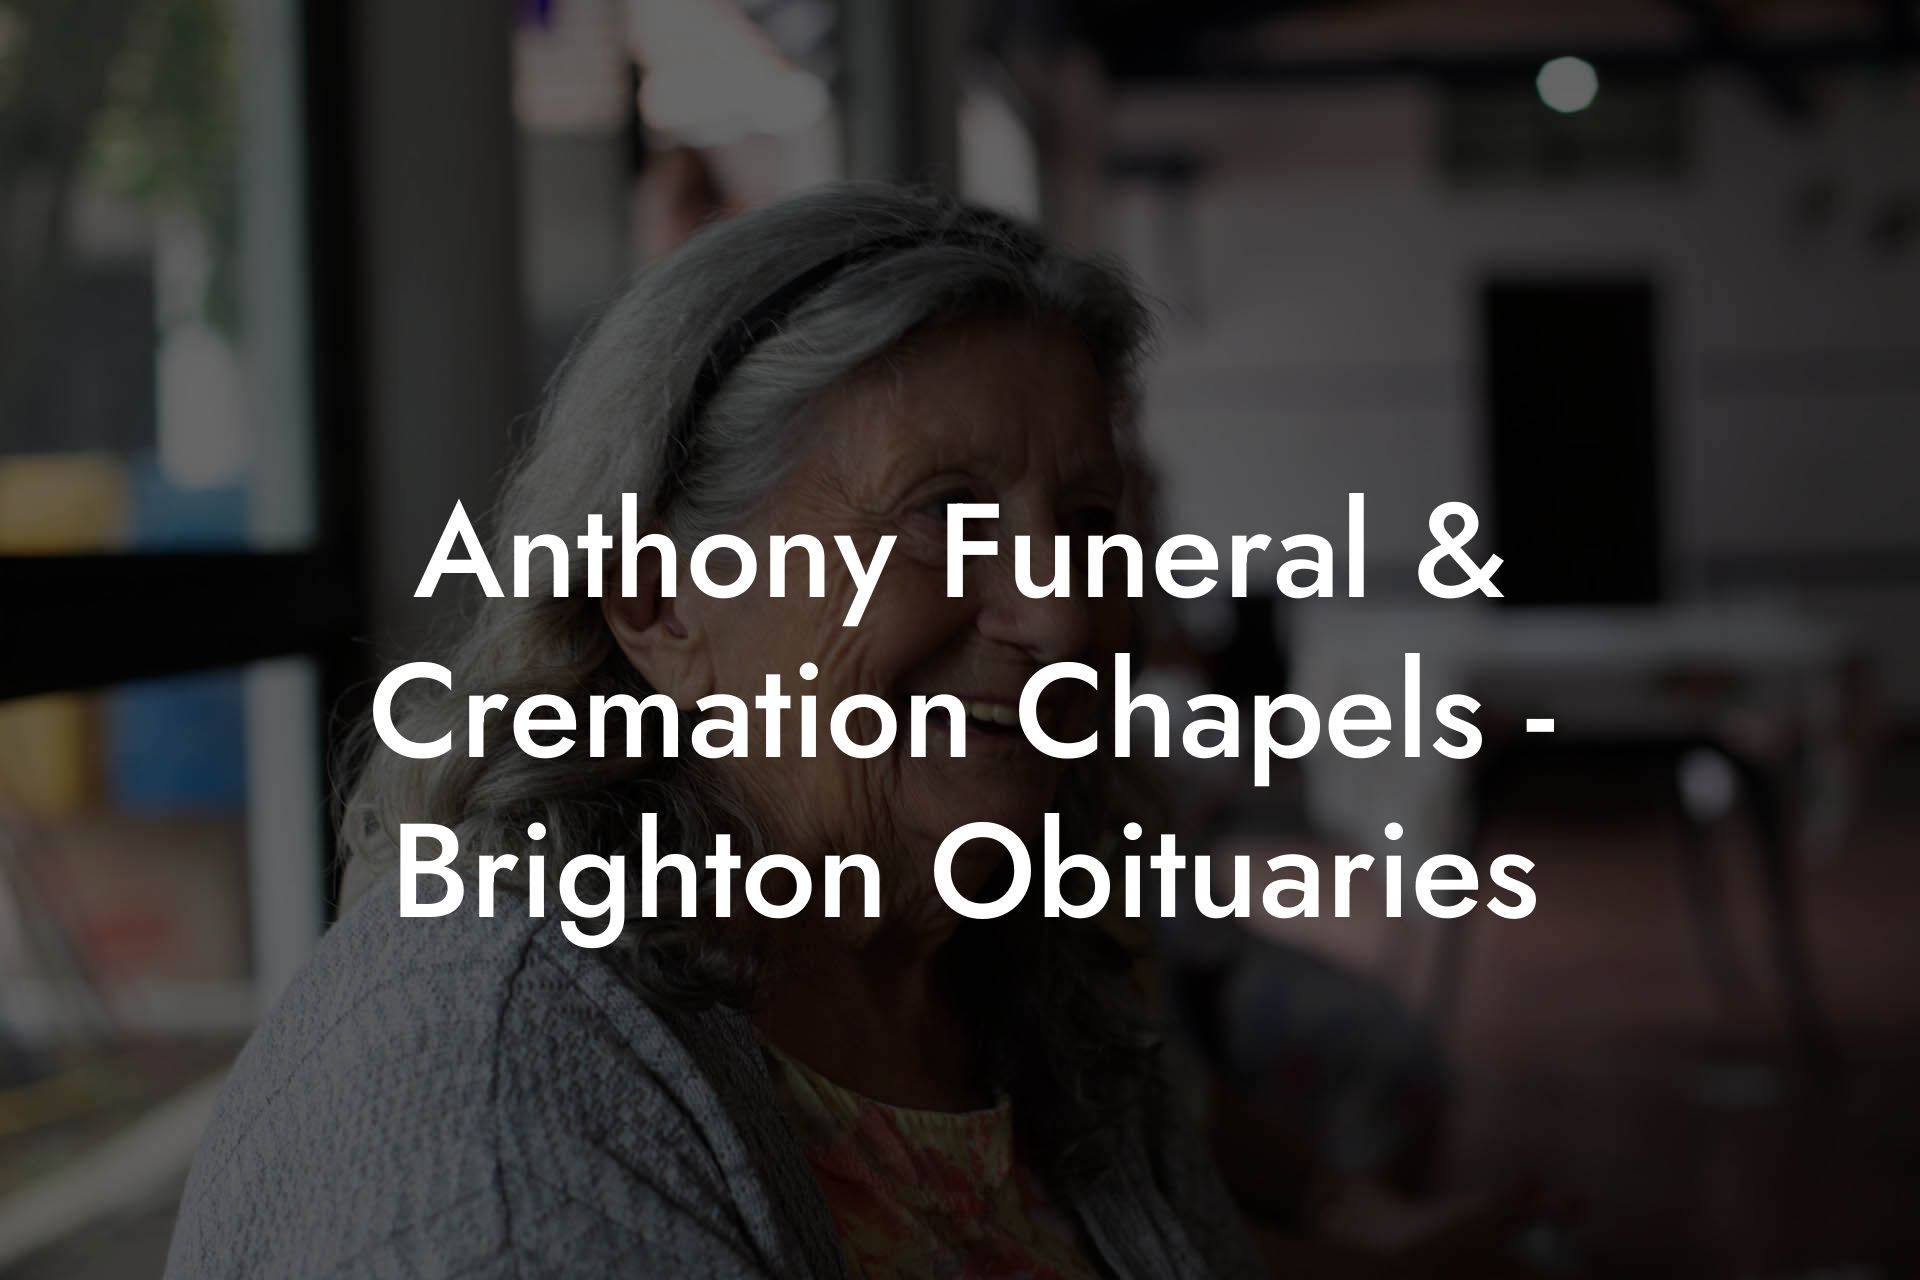 Anthony Funeral & Cremation Chapels - Brighton Obituaries